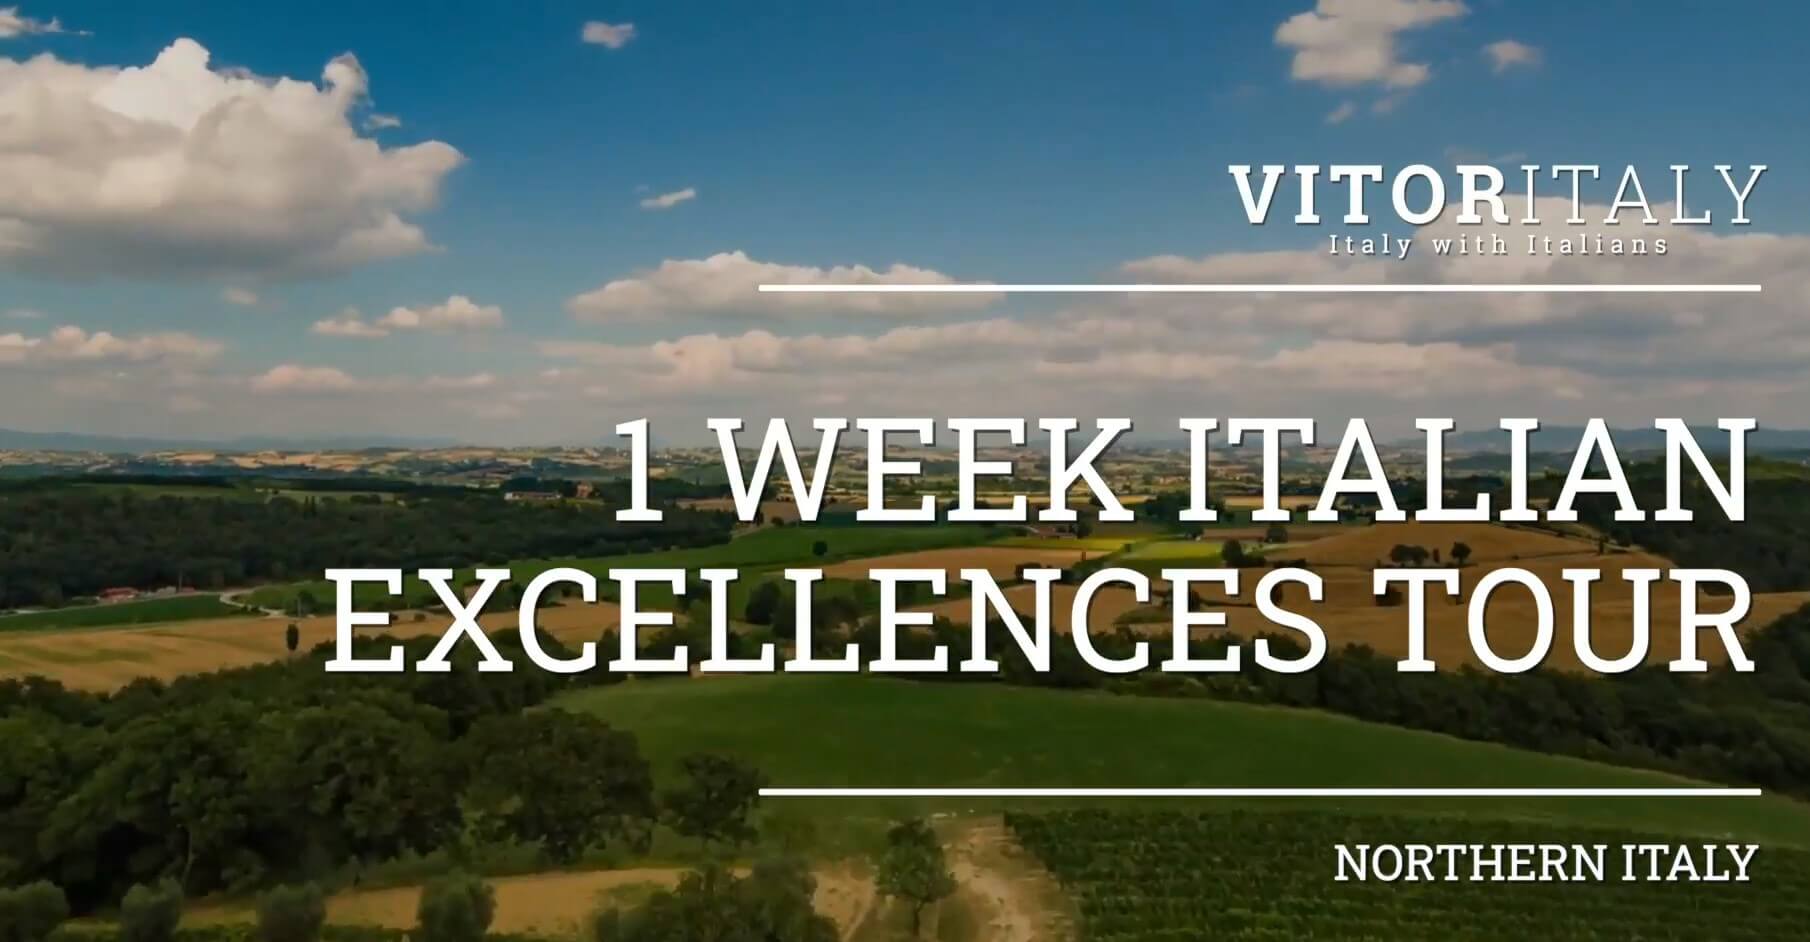 1-WEEK ITALIAN EXCELLENCES TOUR - NORTHERN ITALY